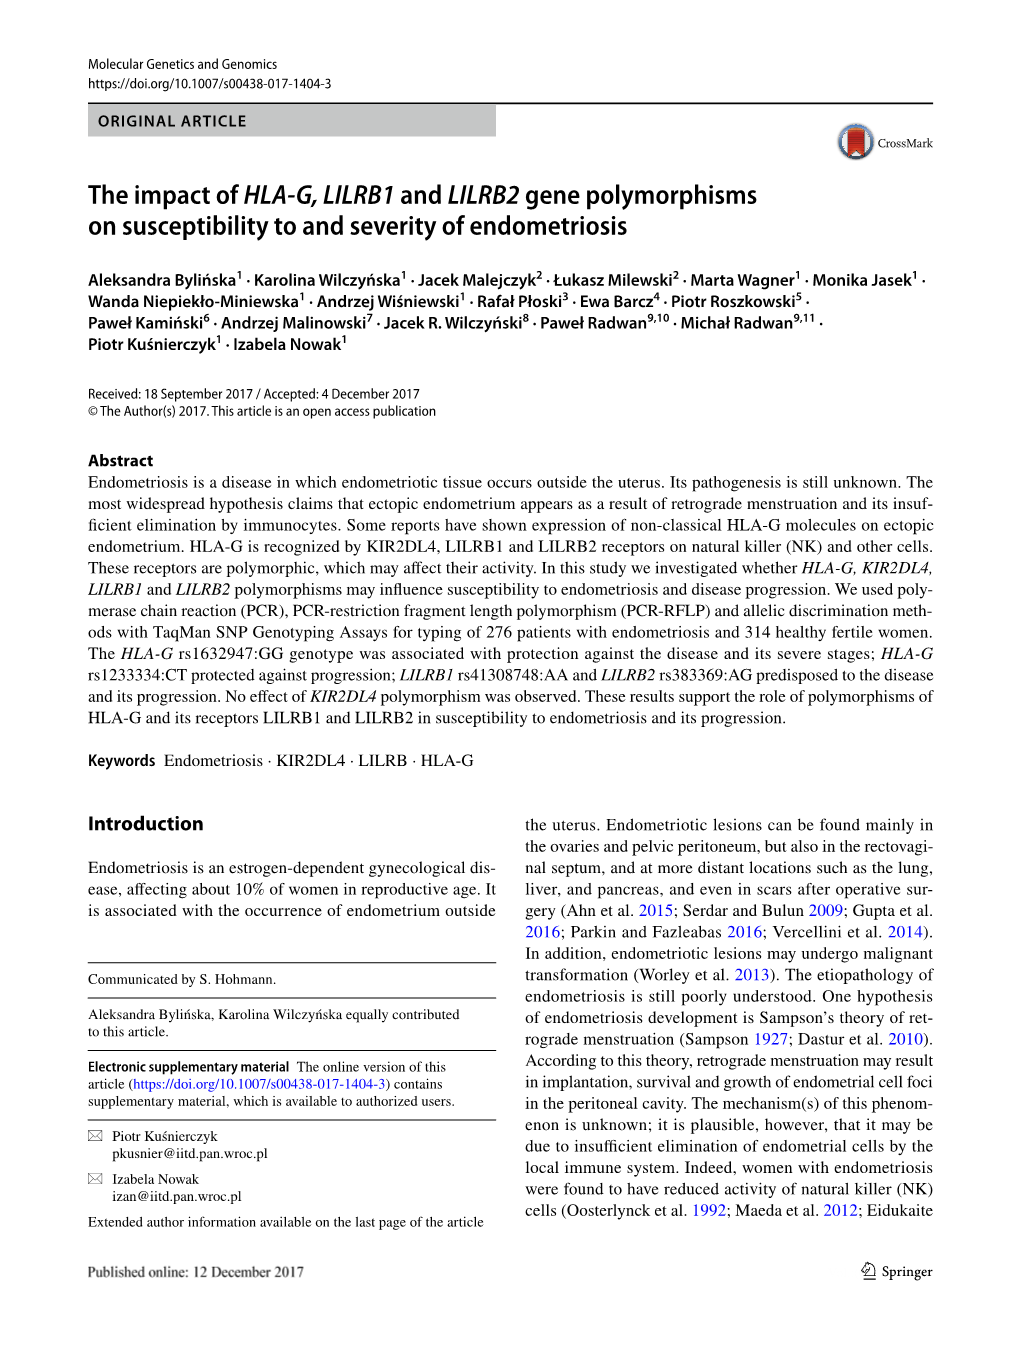 The Impact of HLA-G, LILRB1 and LILRB2 Gene Polymorphisms on Susceptibility to and Severity of Endometriosis